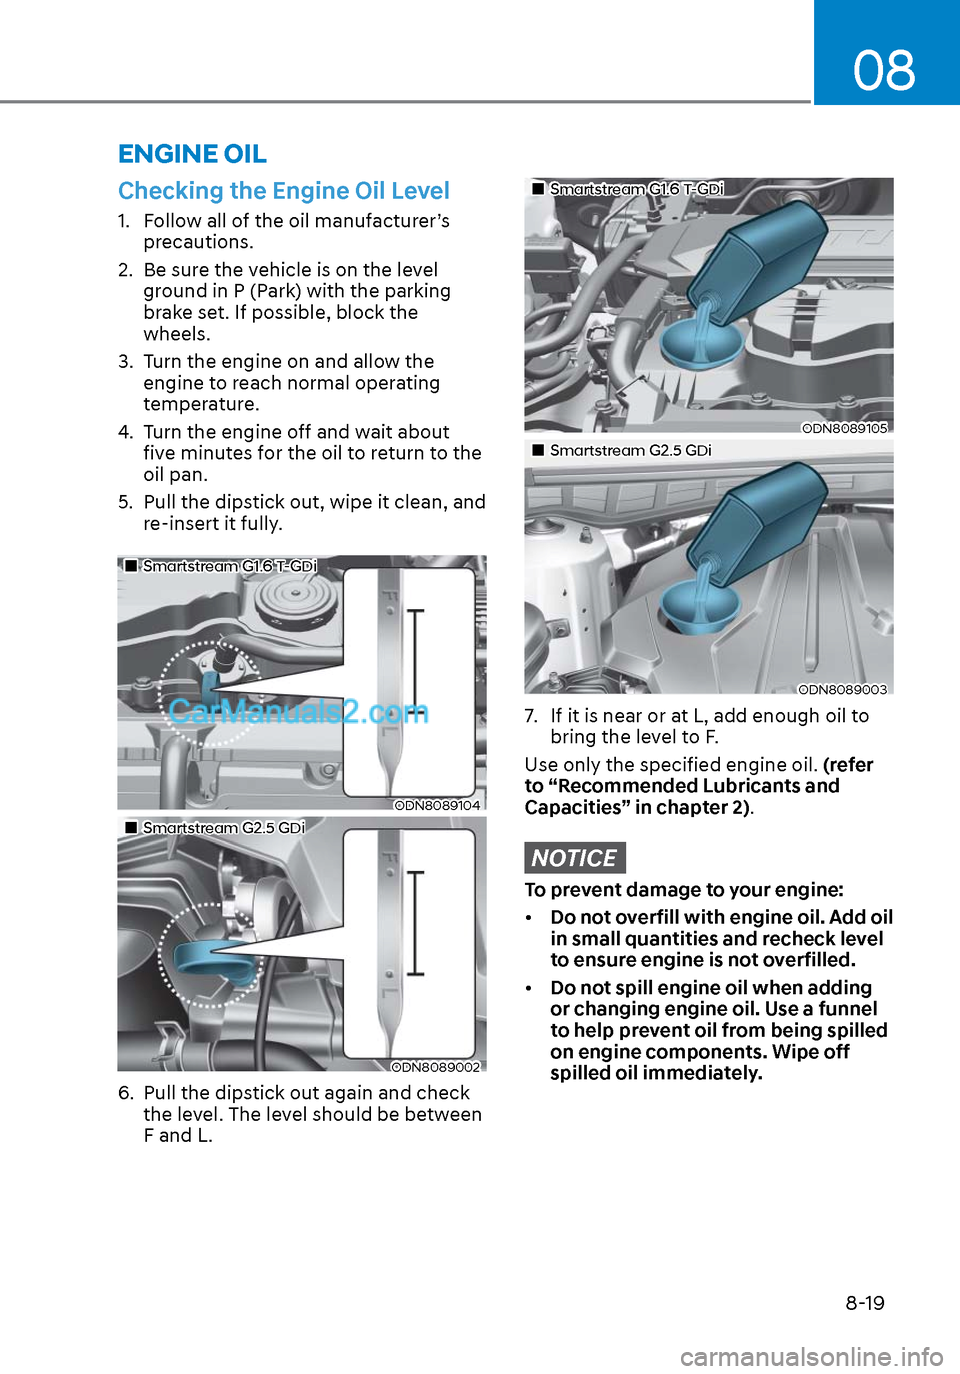 Hyundai Sonata 2020  Owners Manual 08
8-19
Checking the Engine Oil Level
1.  Follow all of the oil manufacturer’s precautions.
2.  Be sure the vehicle is on the level  ground in P (Park) with the parking 
brake set. If possible, bloc